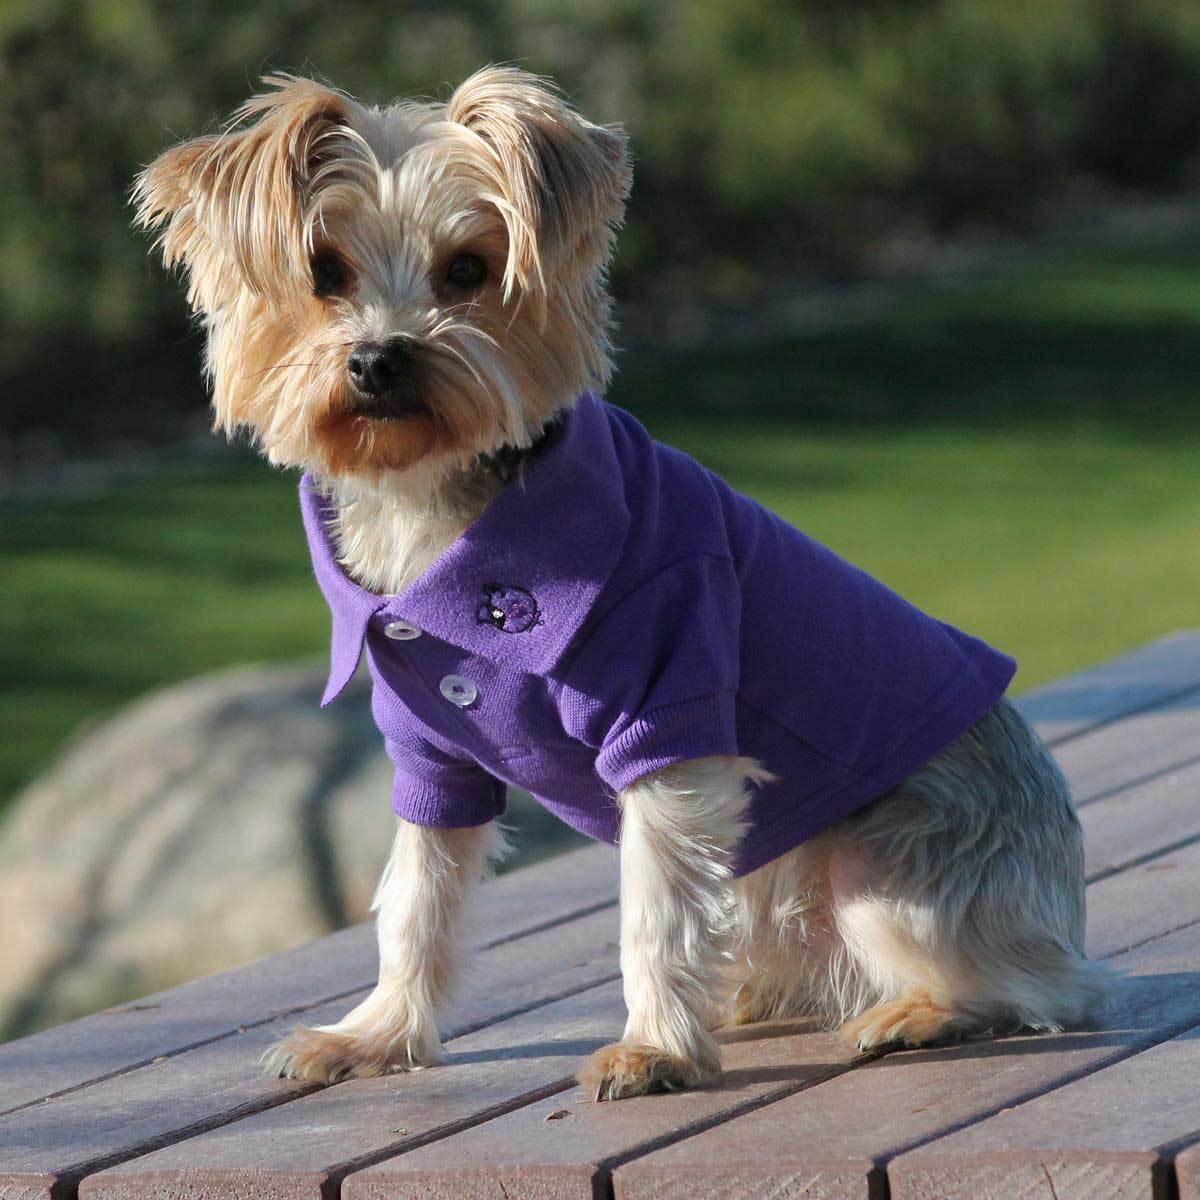 100% Cotton Polo Shirts in Violet | Pawlicious & Company